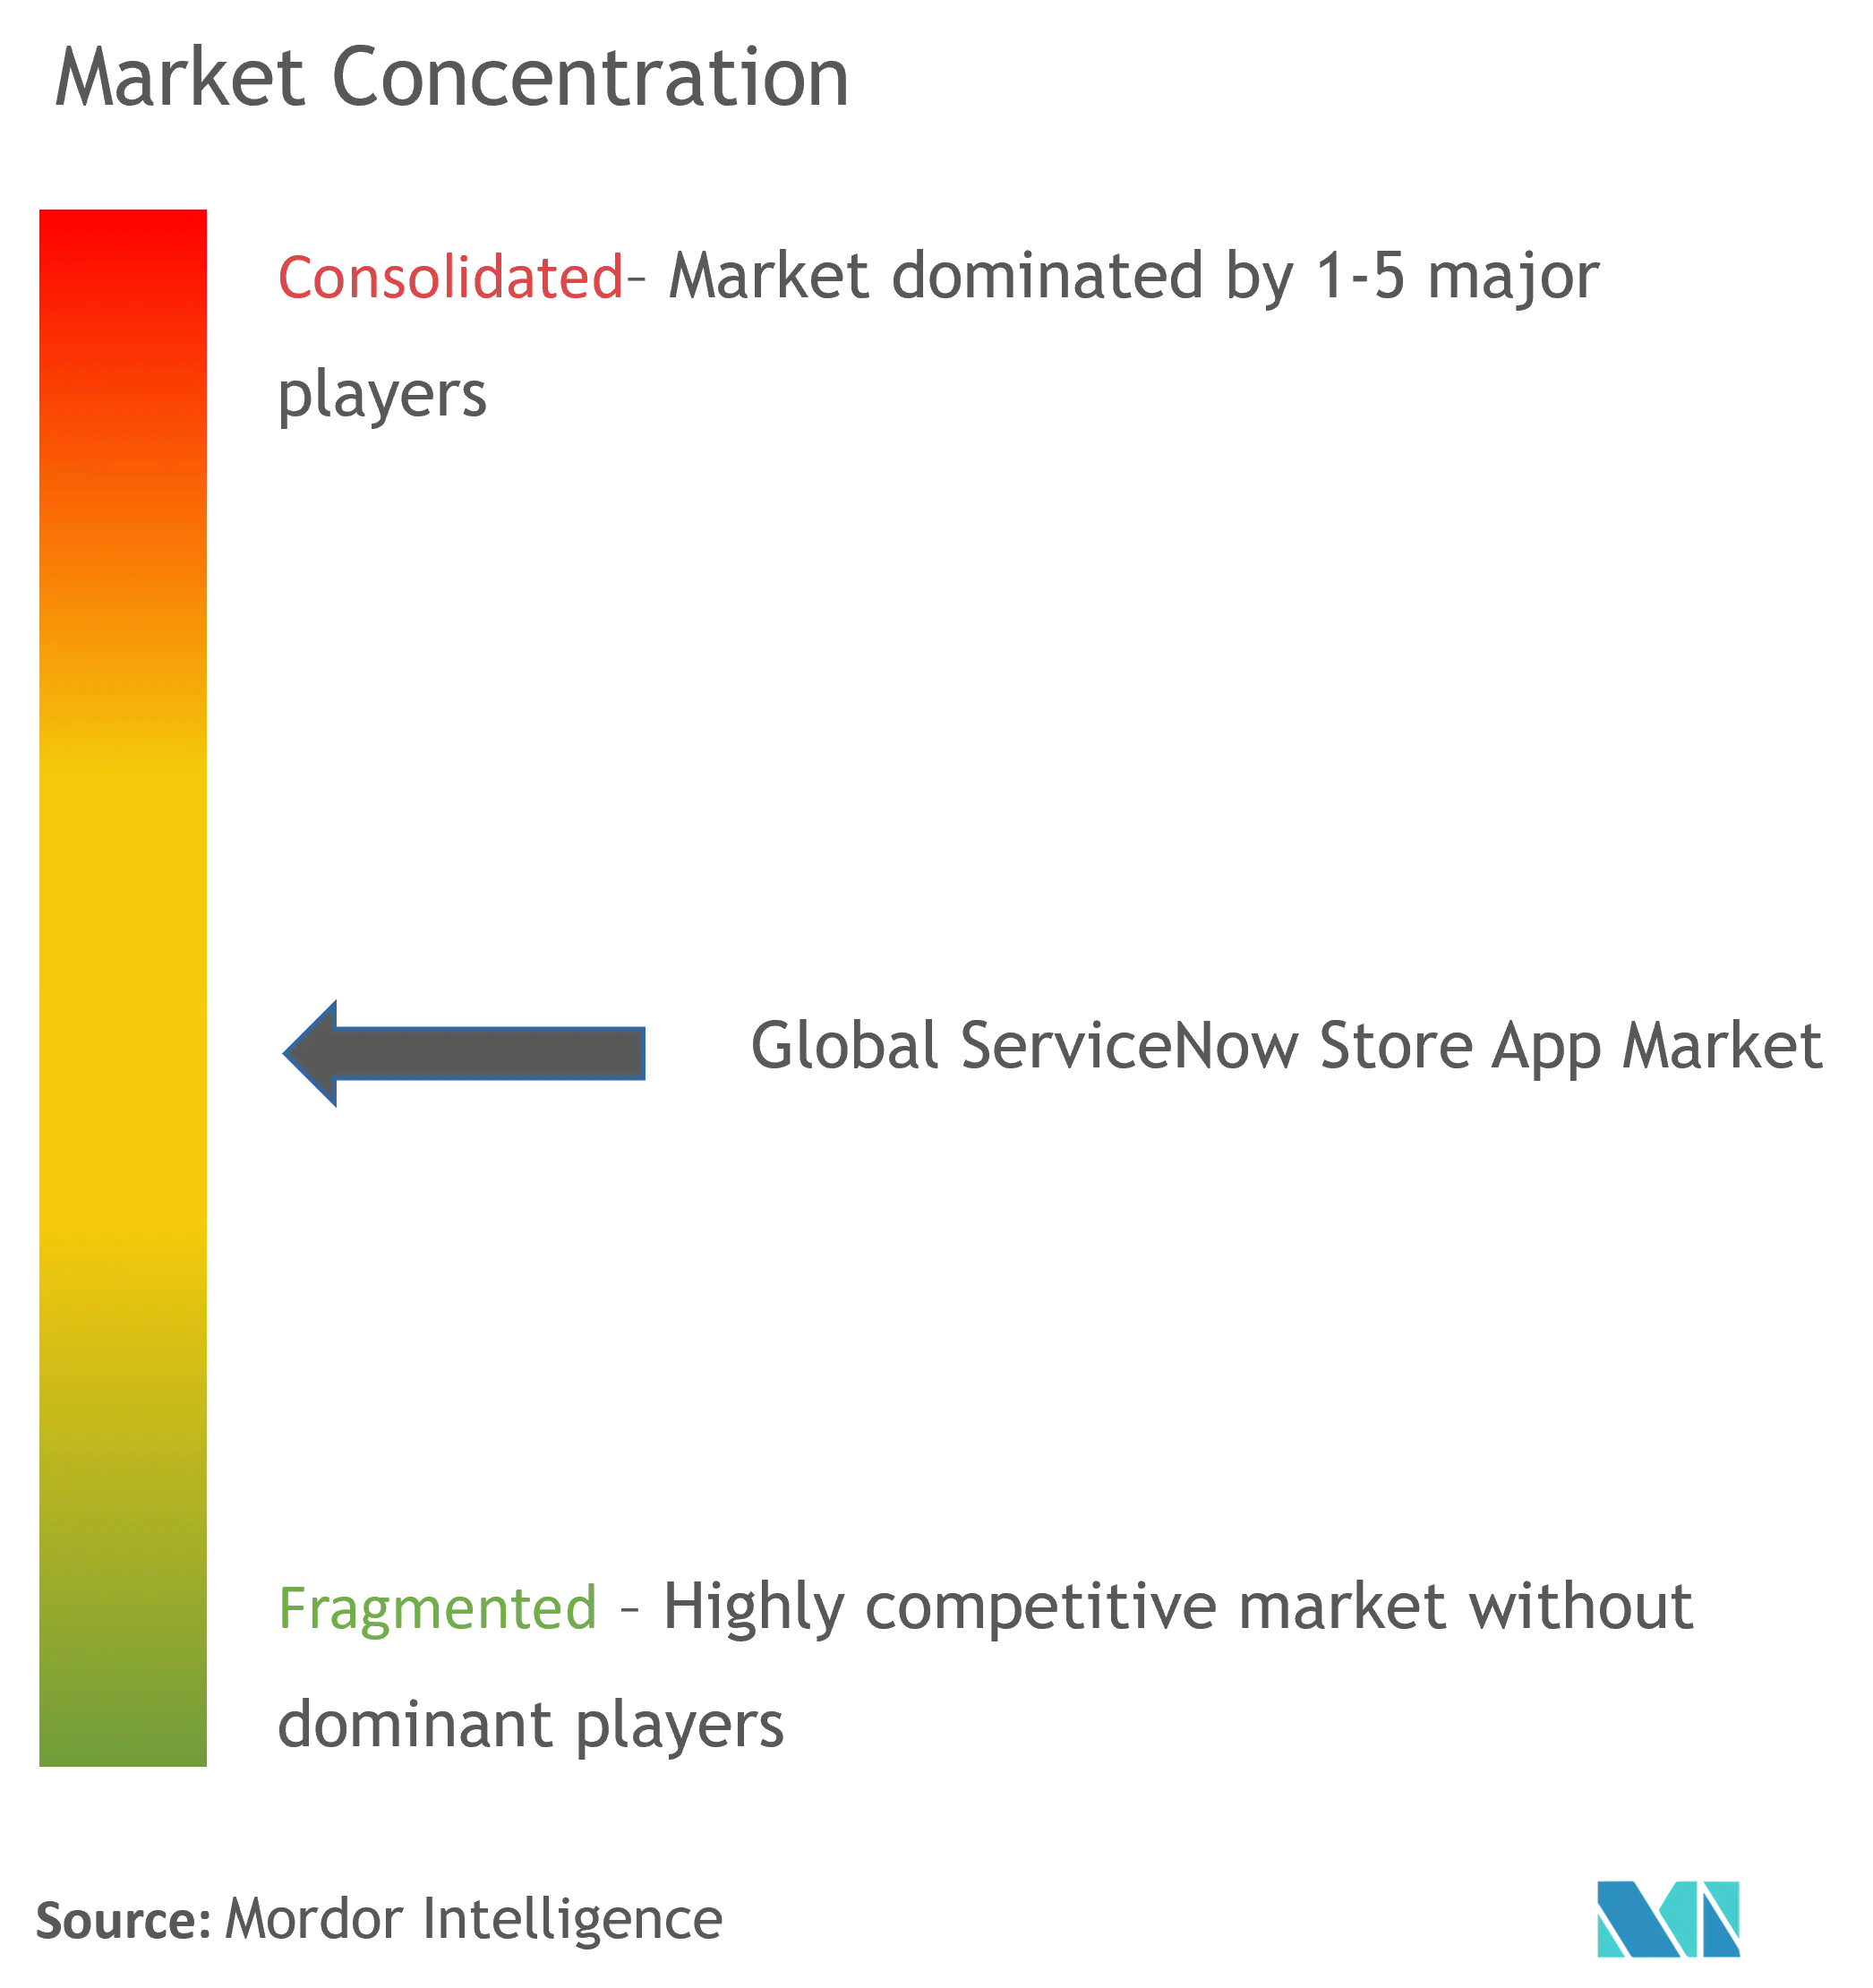 ServiceNow Store Apps Market Concentration